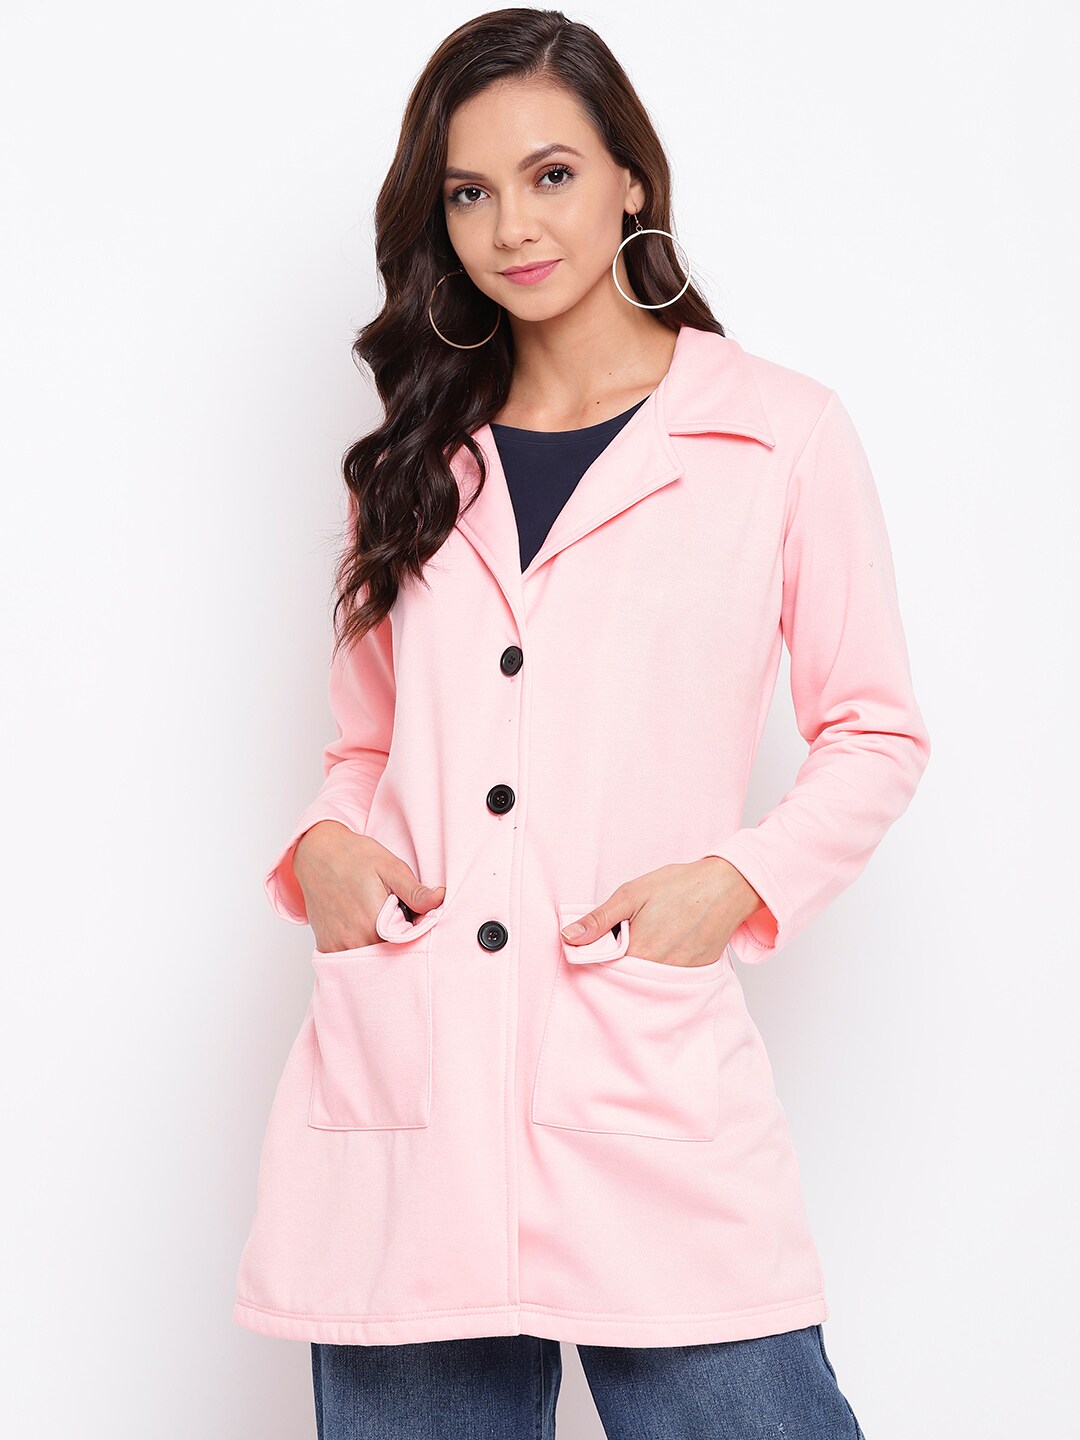 Belle Fille Women Peach-Coloured Solid Tailored Jacket Price in India